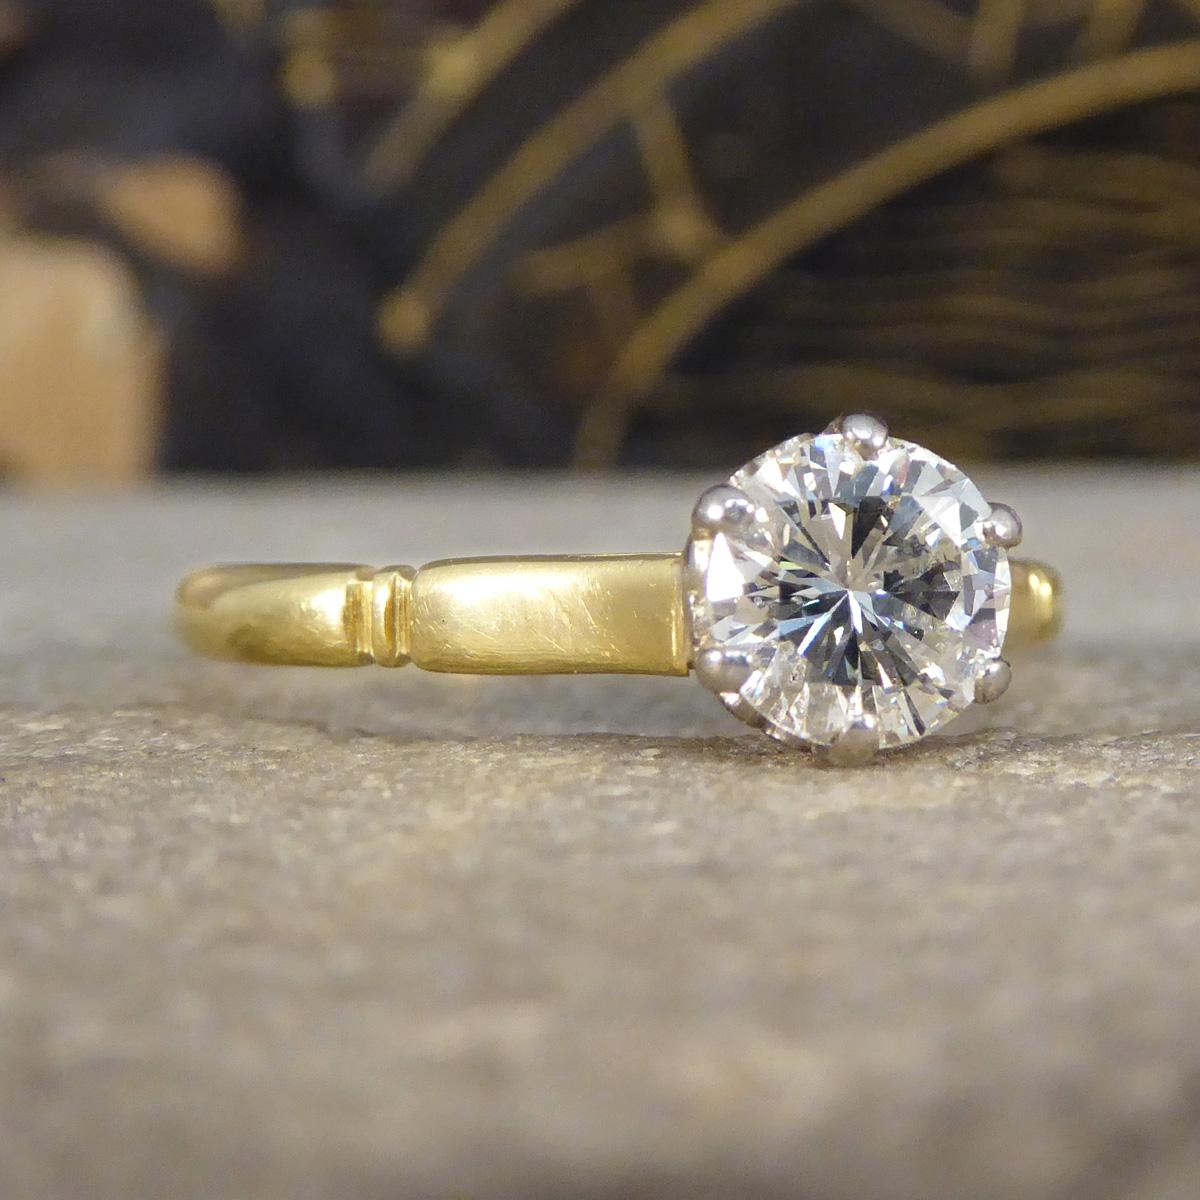 This vintage 0.82ct Diamond solitaire ring is a stunning piece, exuding timeless elegance and classic beauty. Expertly crafted in rich yellow gold testing as 18ct, the ring features a magnificent 0.82ct diamond solitaire that takes centre stage.